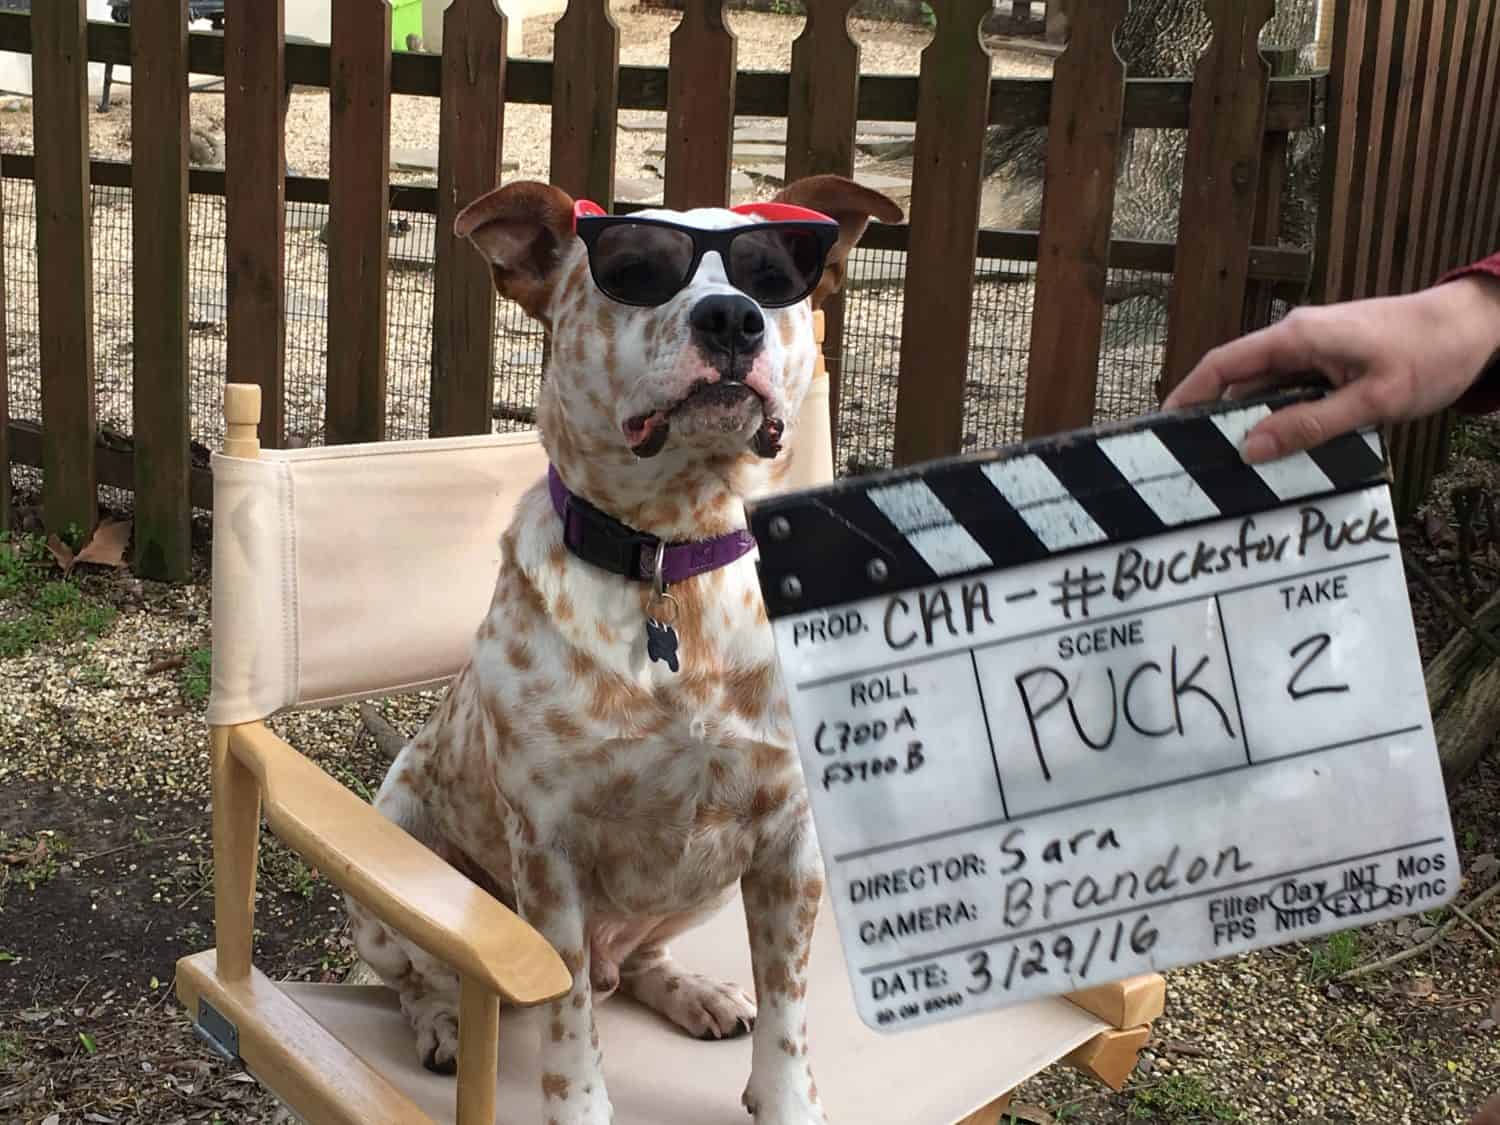 A camera woman says take 2 for an interview with a spotted dog wearing sunglasses